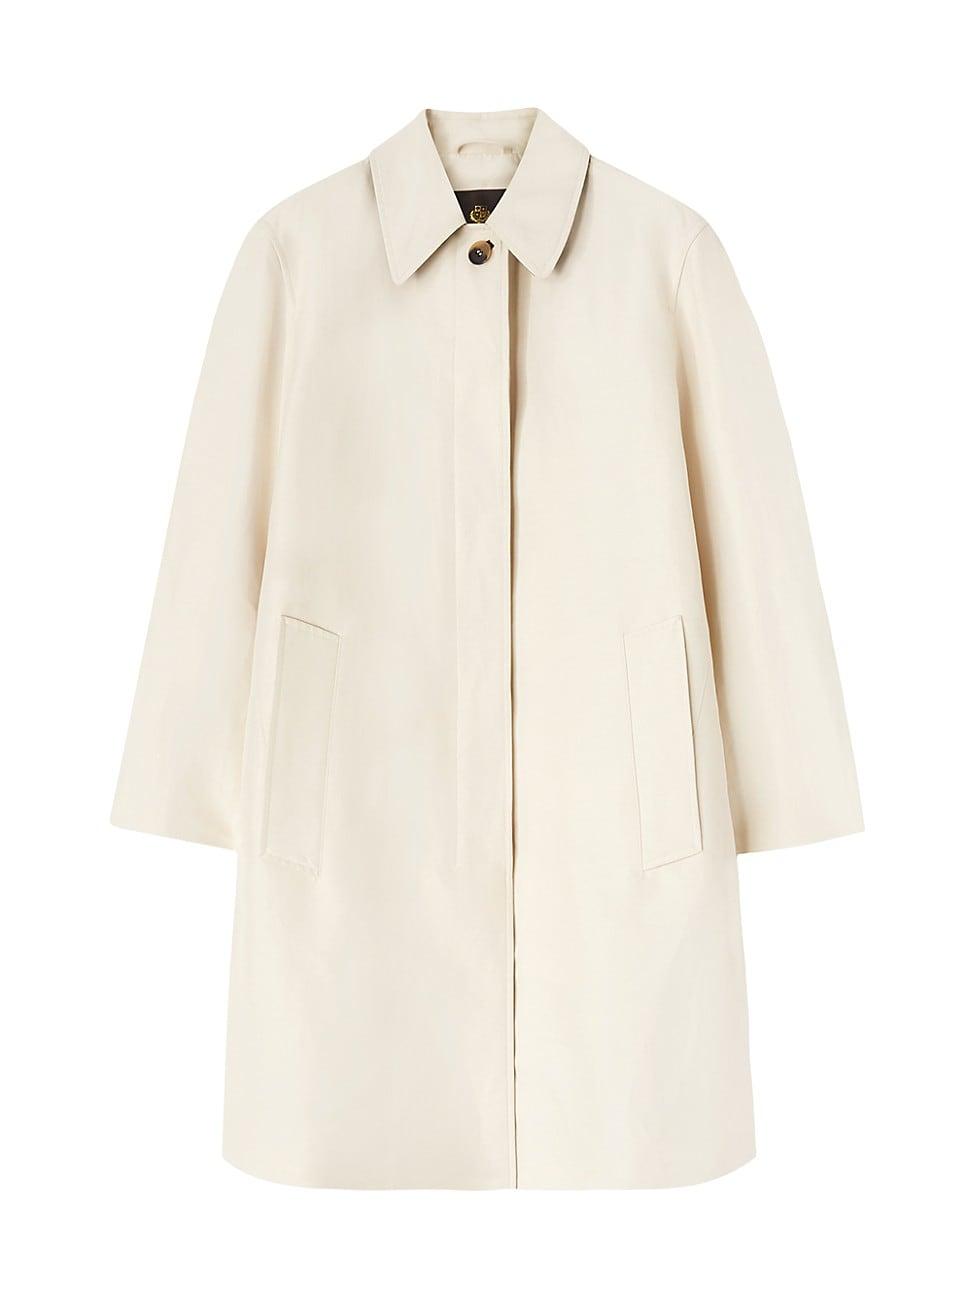 Loro Piana Iconic Cotton-linen Duster Coat in Natural | Lyst